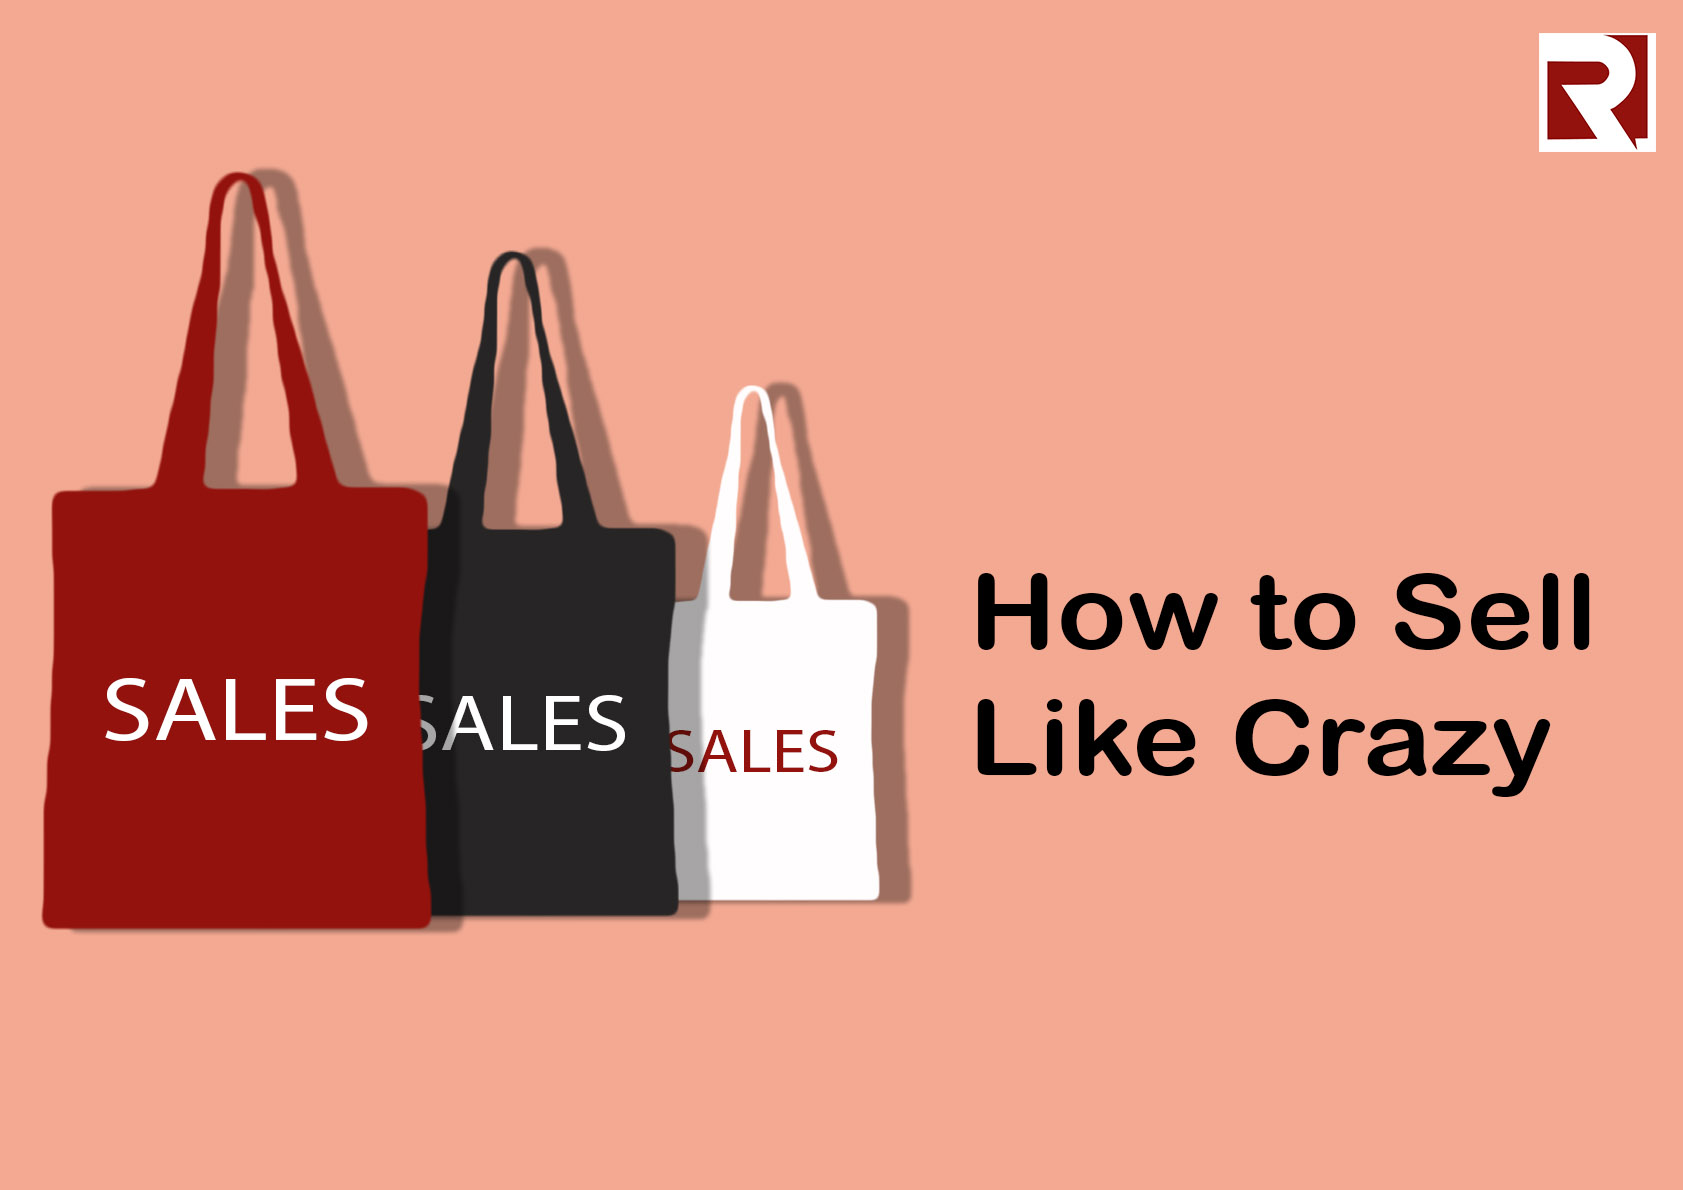 How to Sell Like Crazy